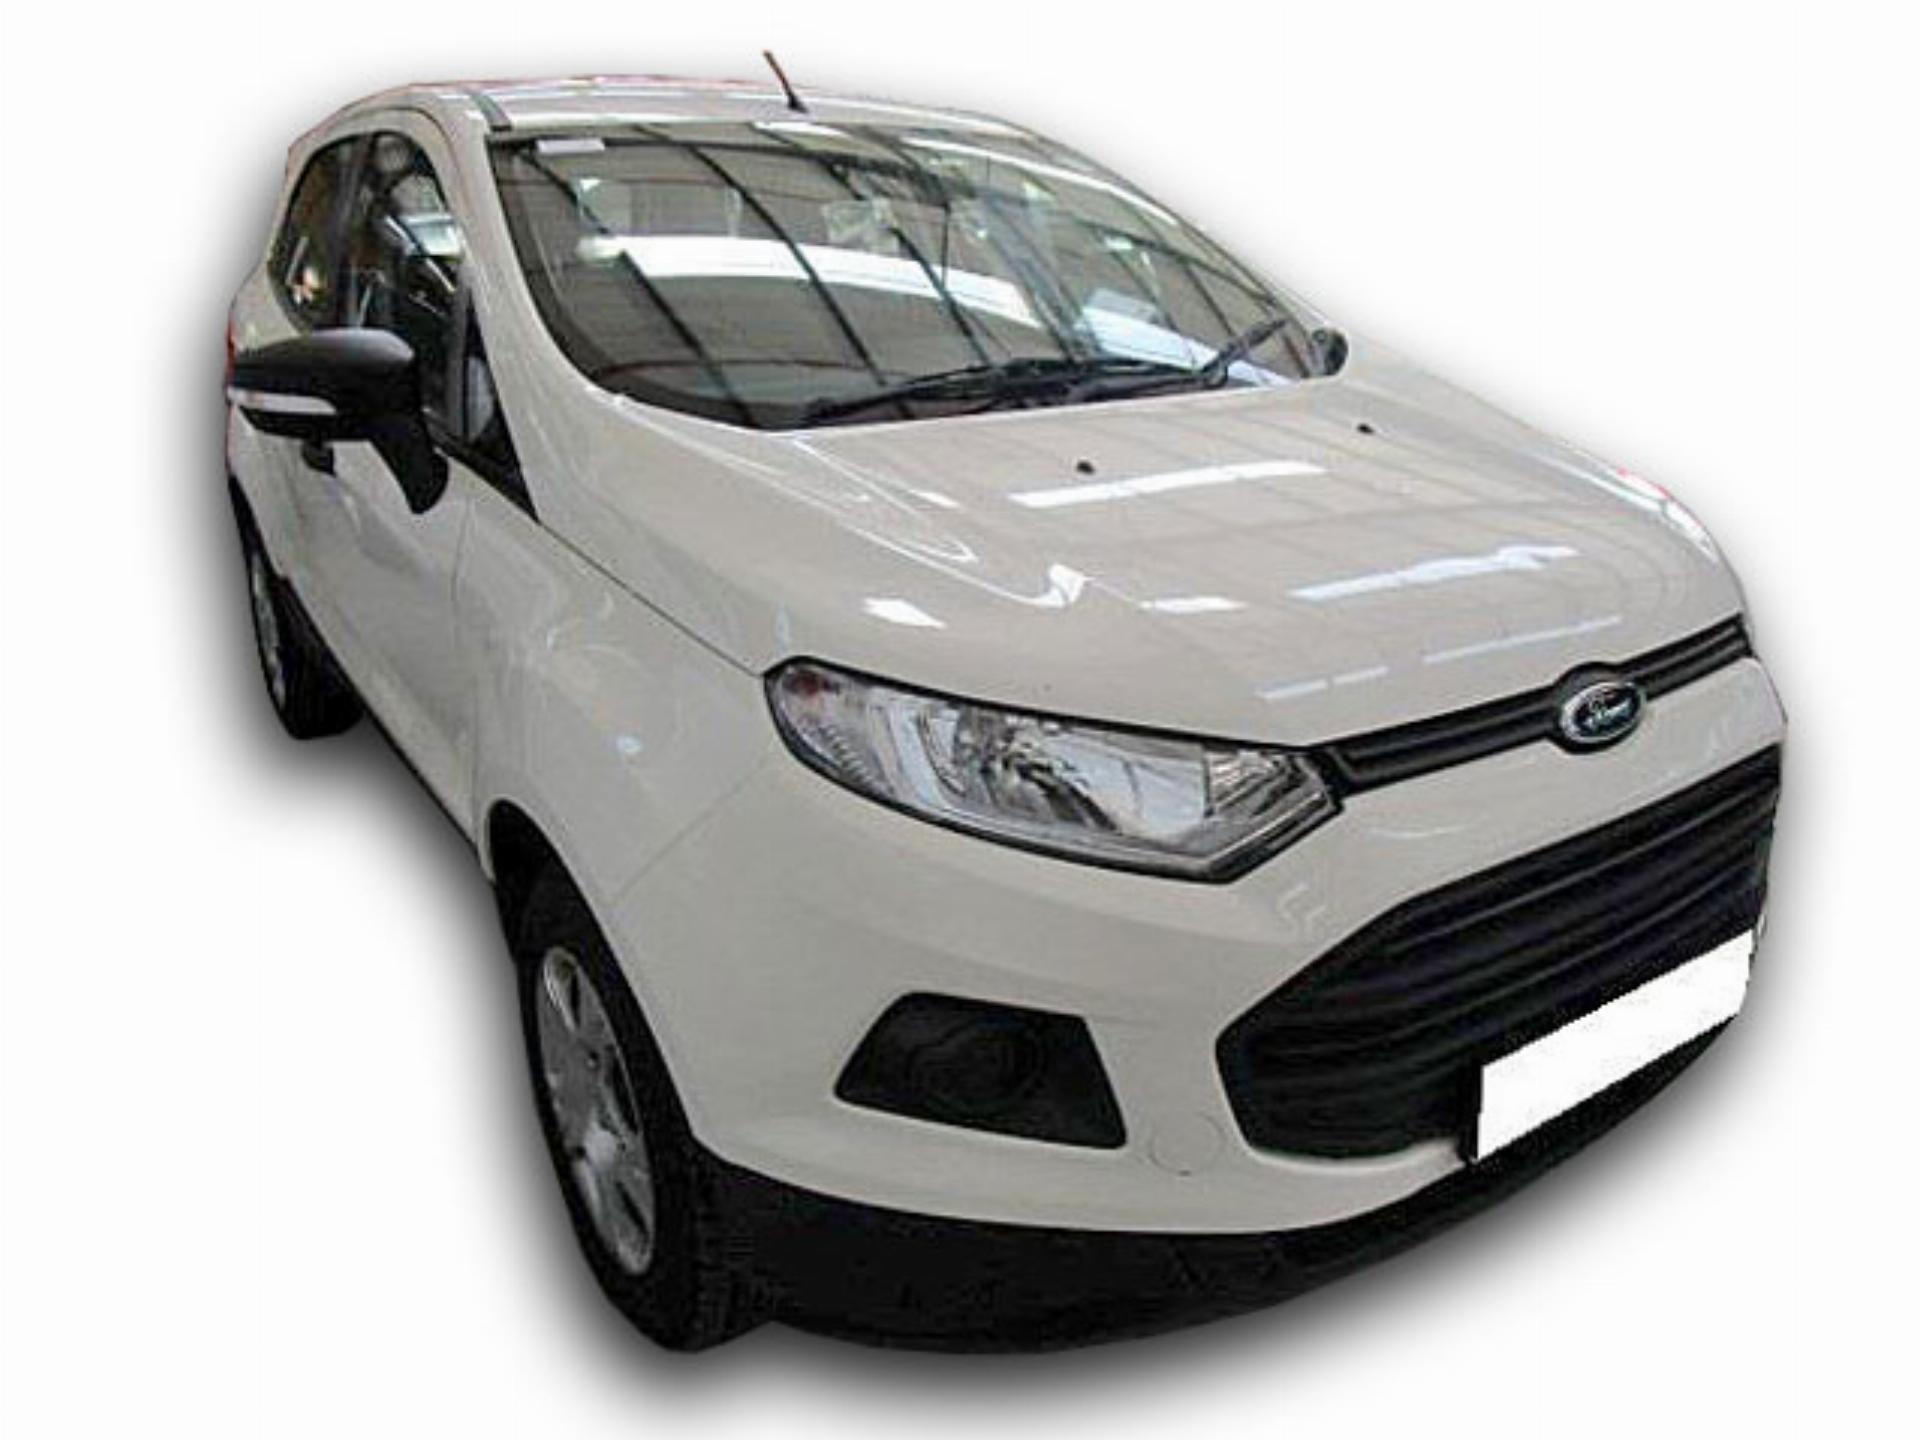 Ford Ecosport 1.5 Tivct Ambiente